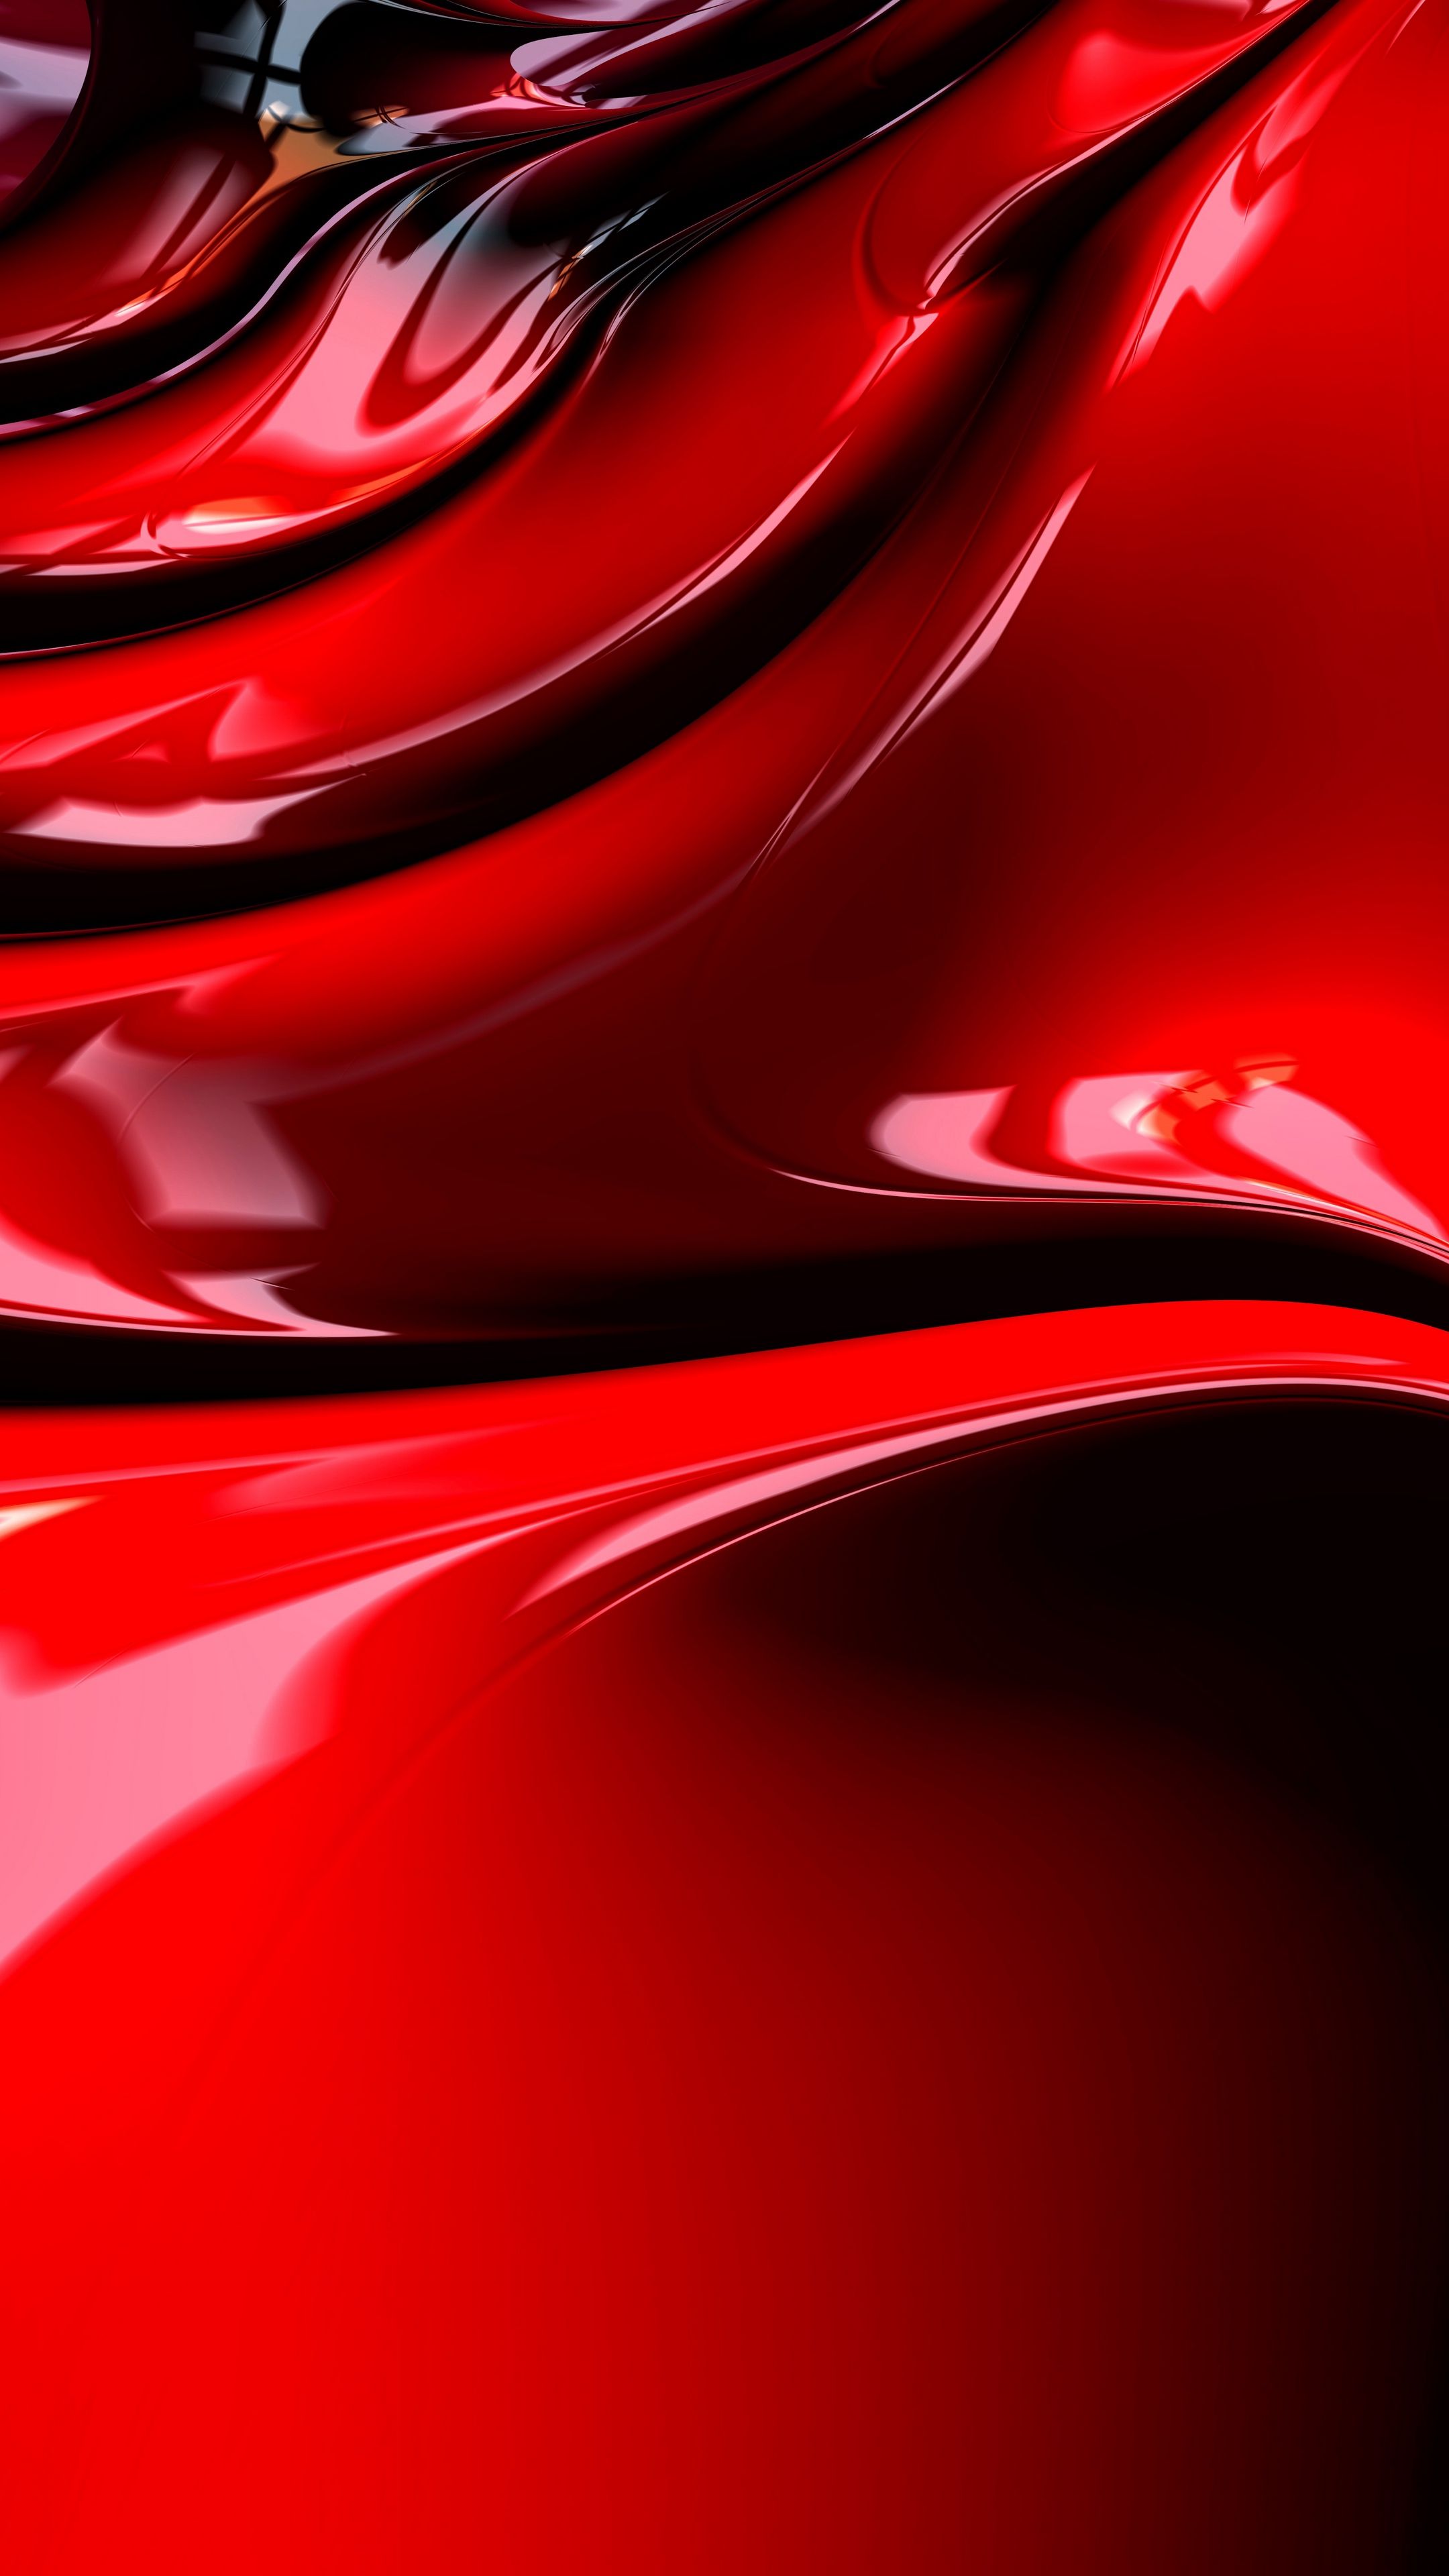 Abstract #fractal, #structure, #surface, #shape, #red #wallpaper HD 4k background for android :). Red wallpaper, Samsung wallpaper, 1080p wallpaper